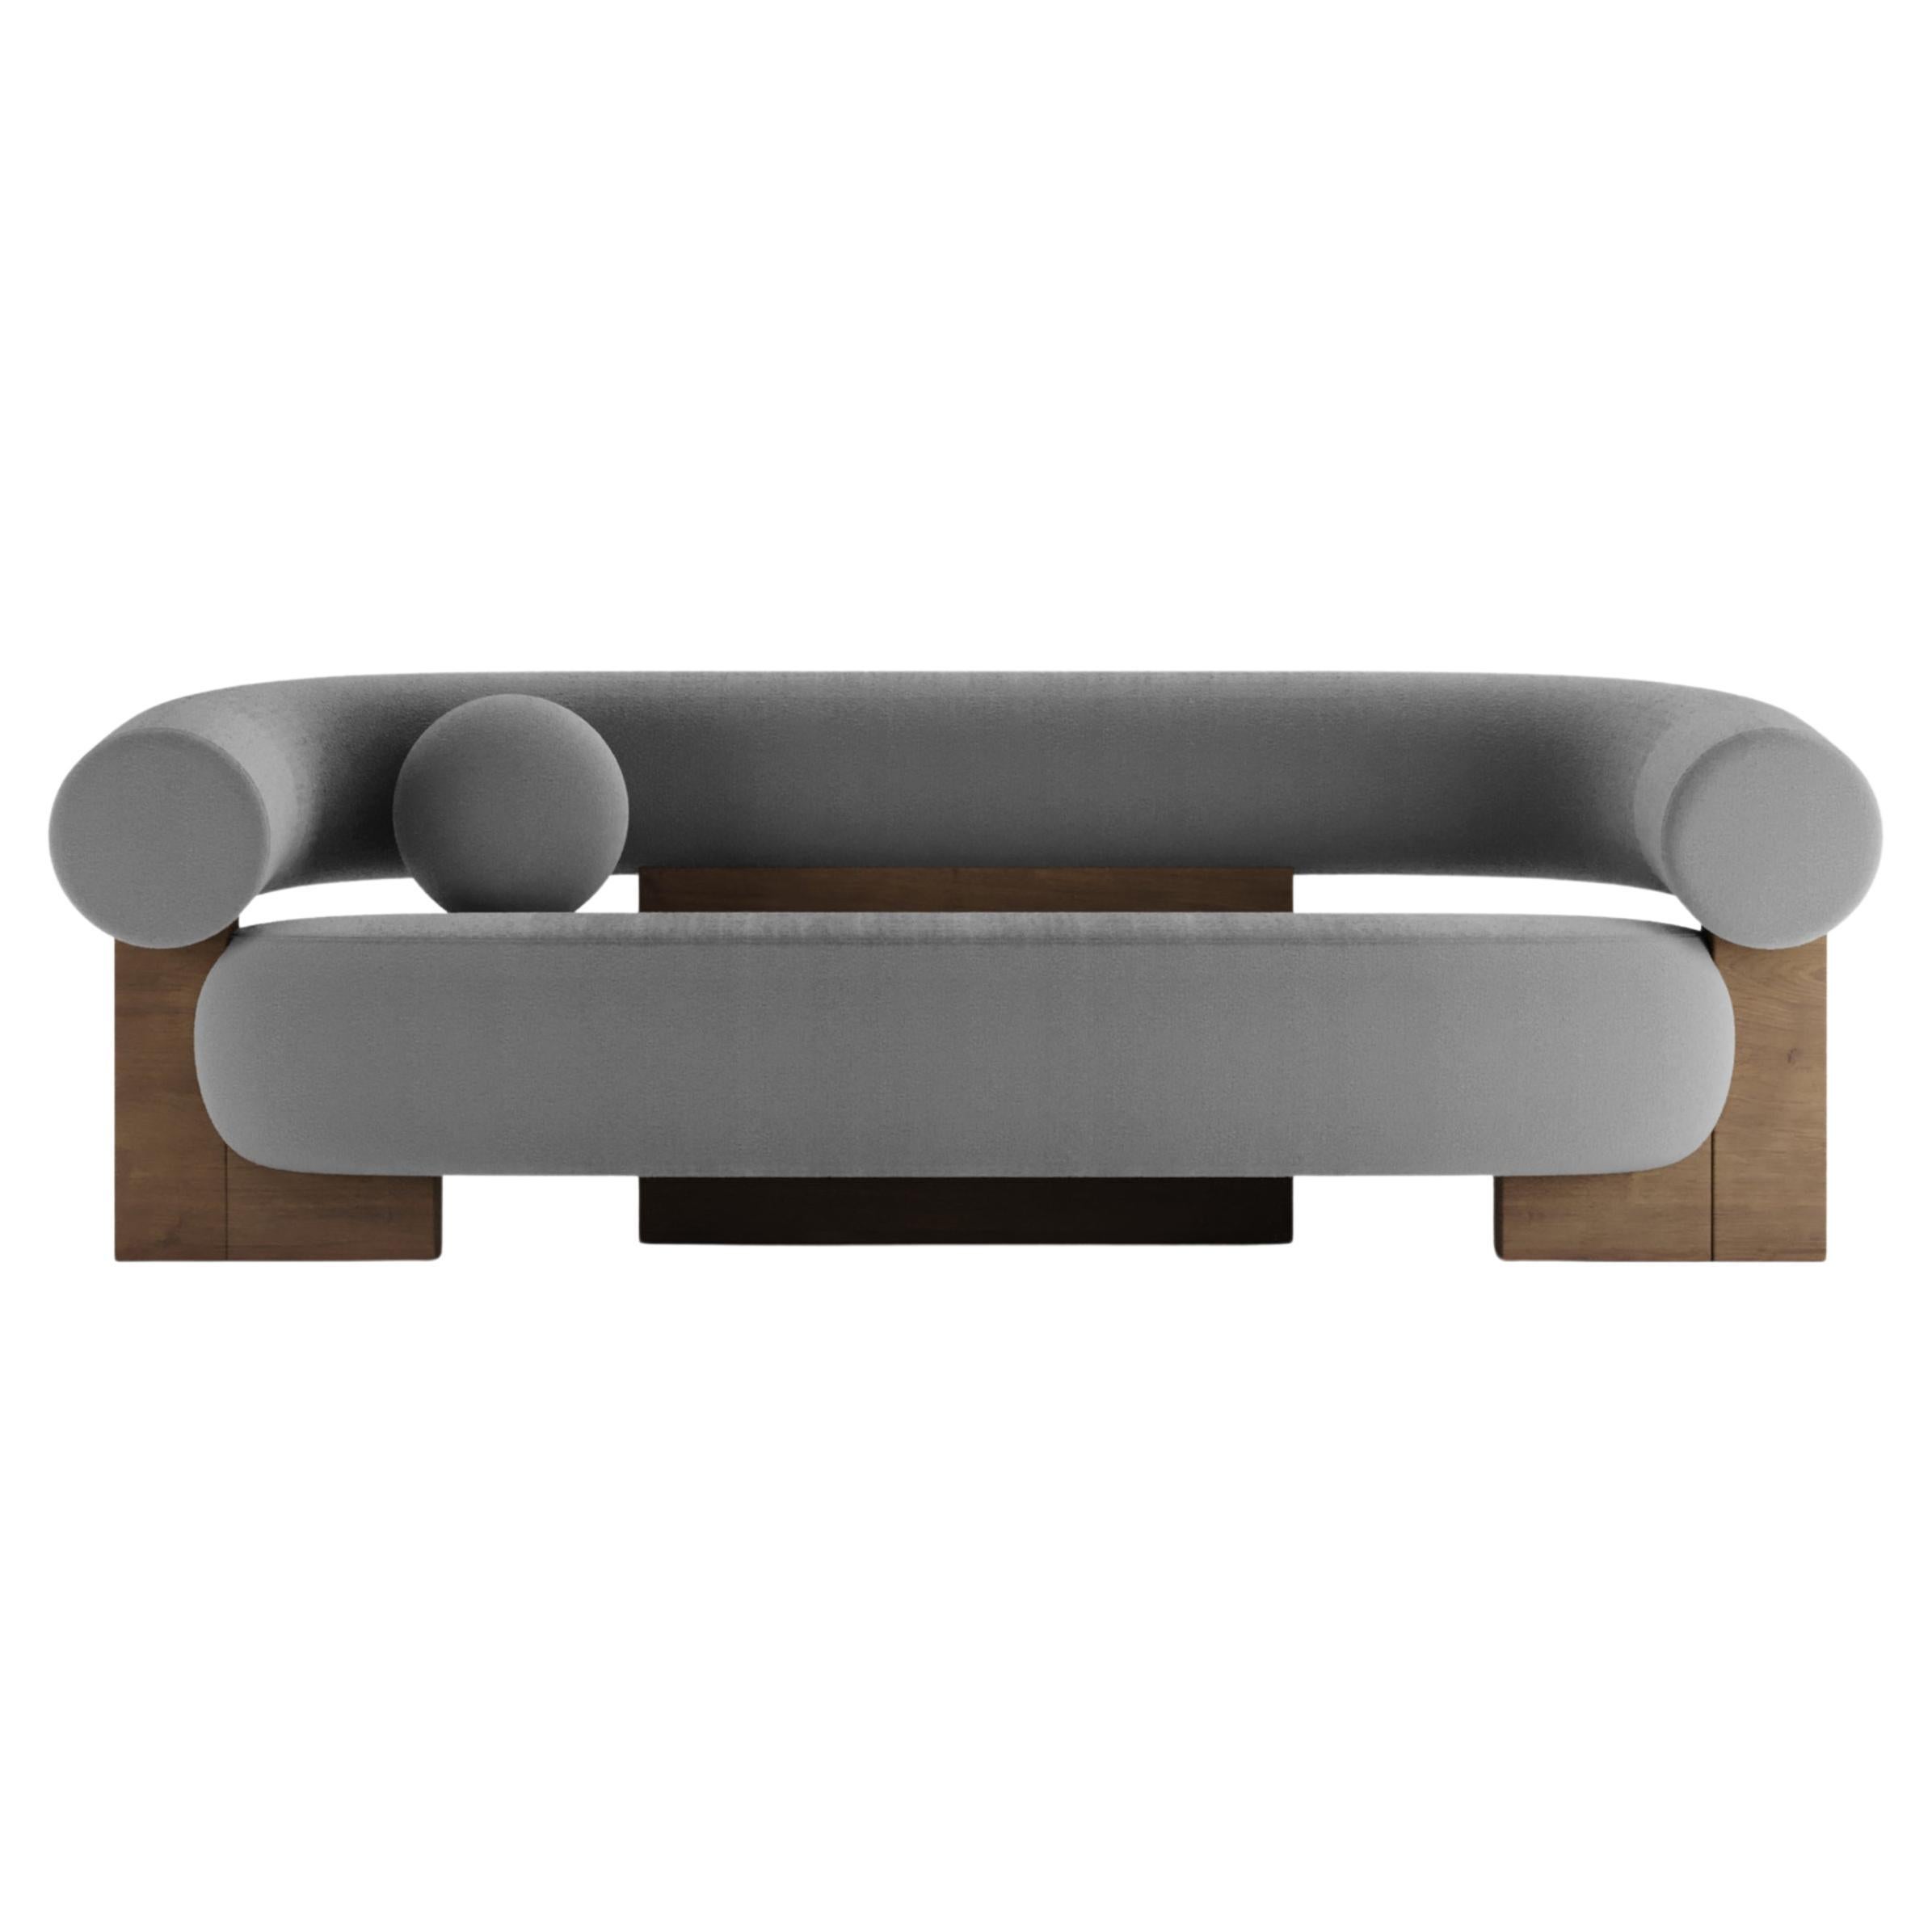 Contemporary Modern Cassete Sofa in Charcoal & Wood by Collector Studio For Sale